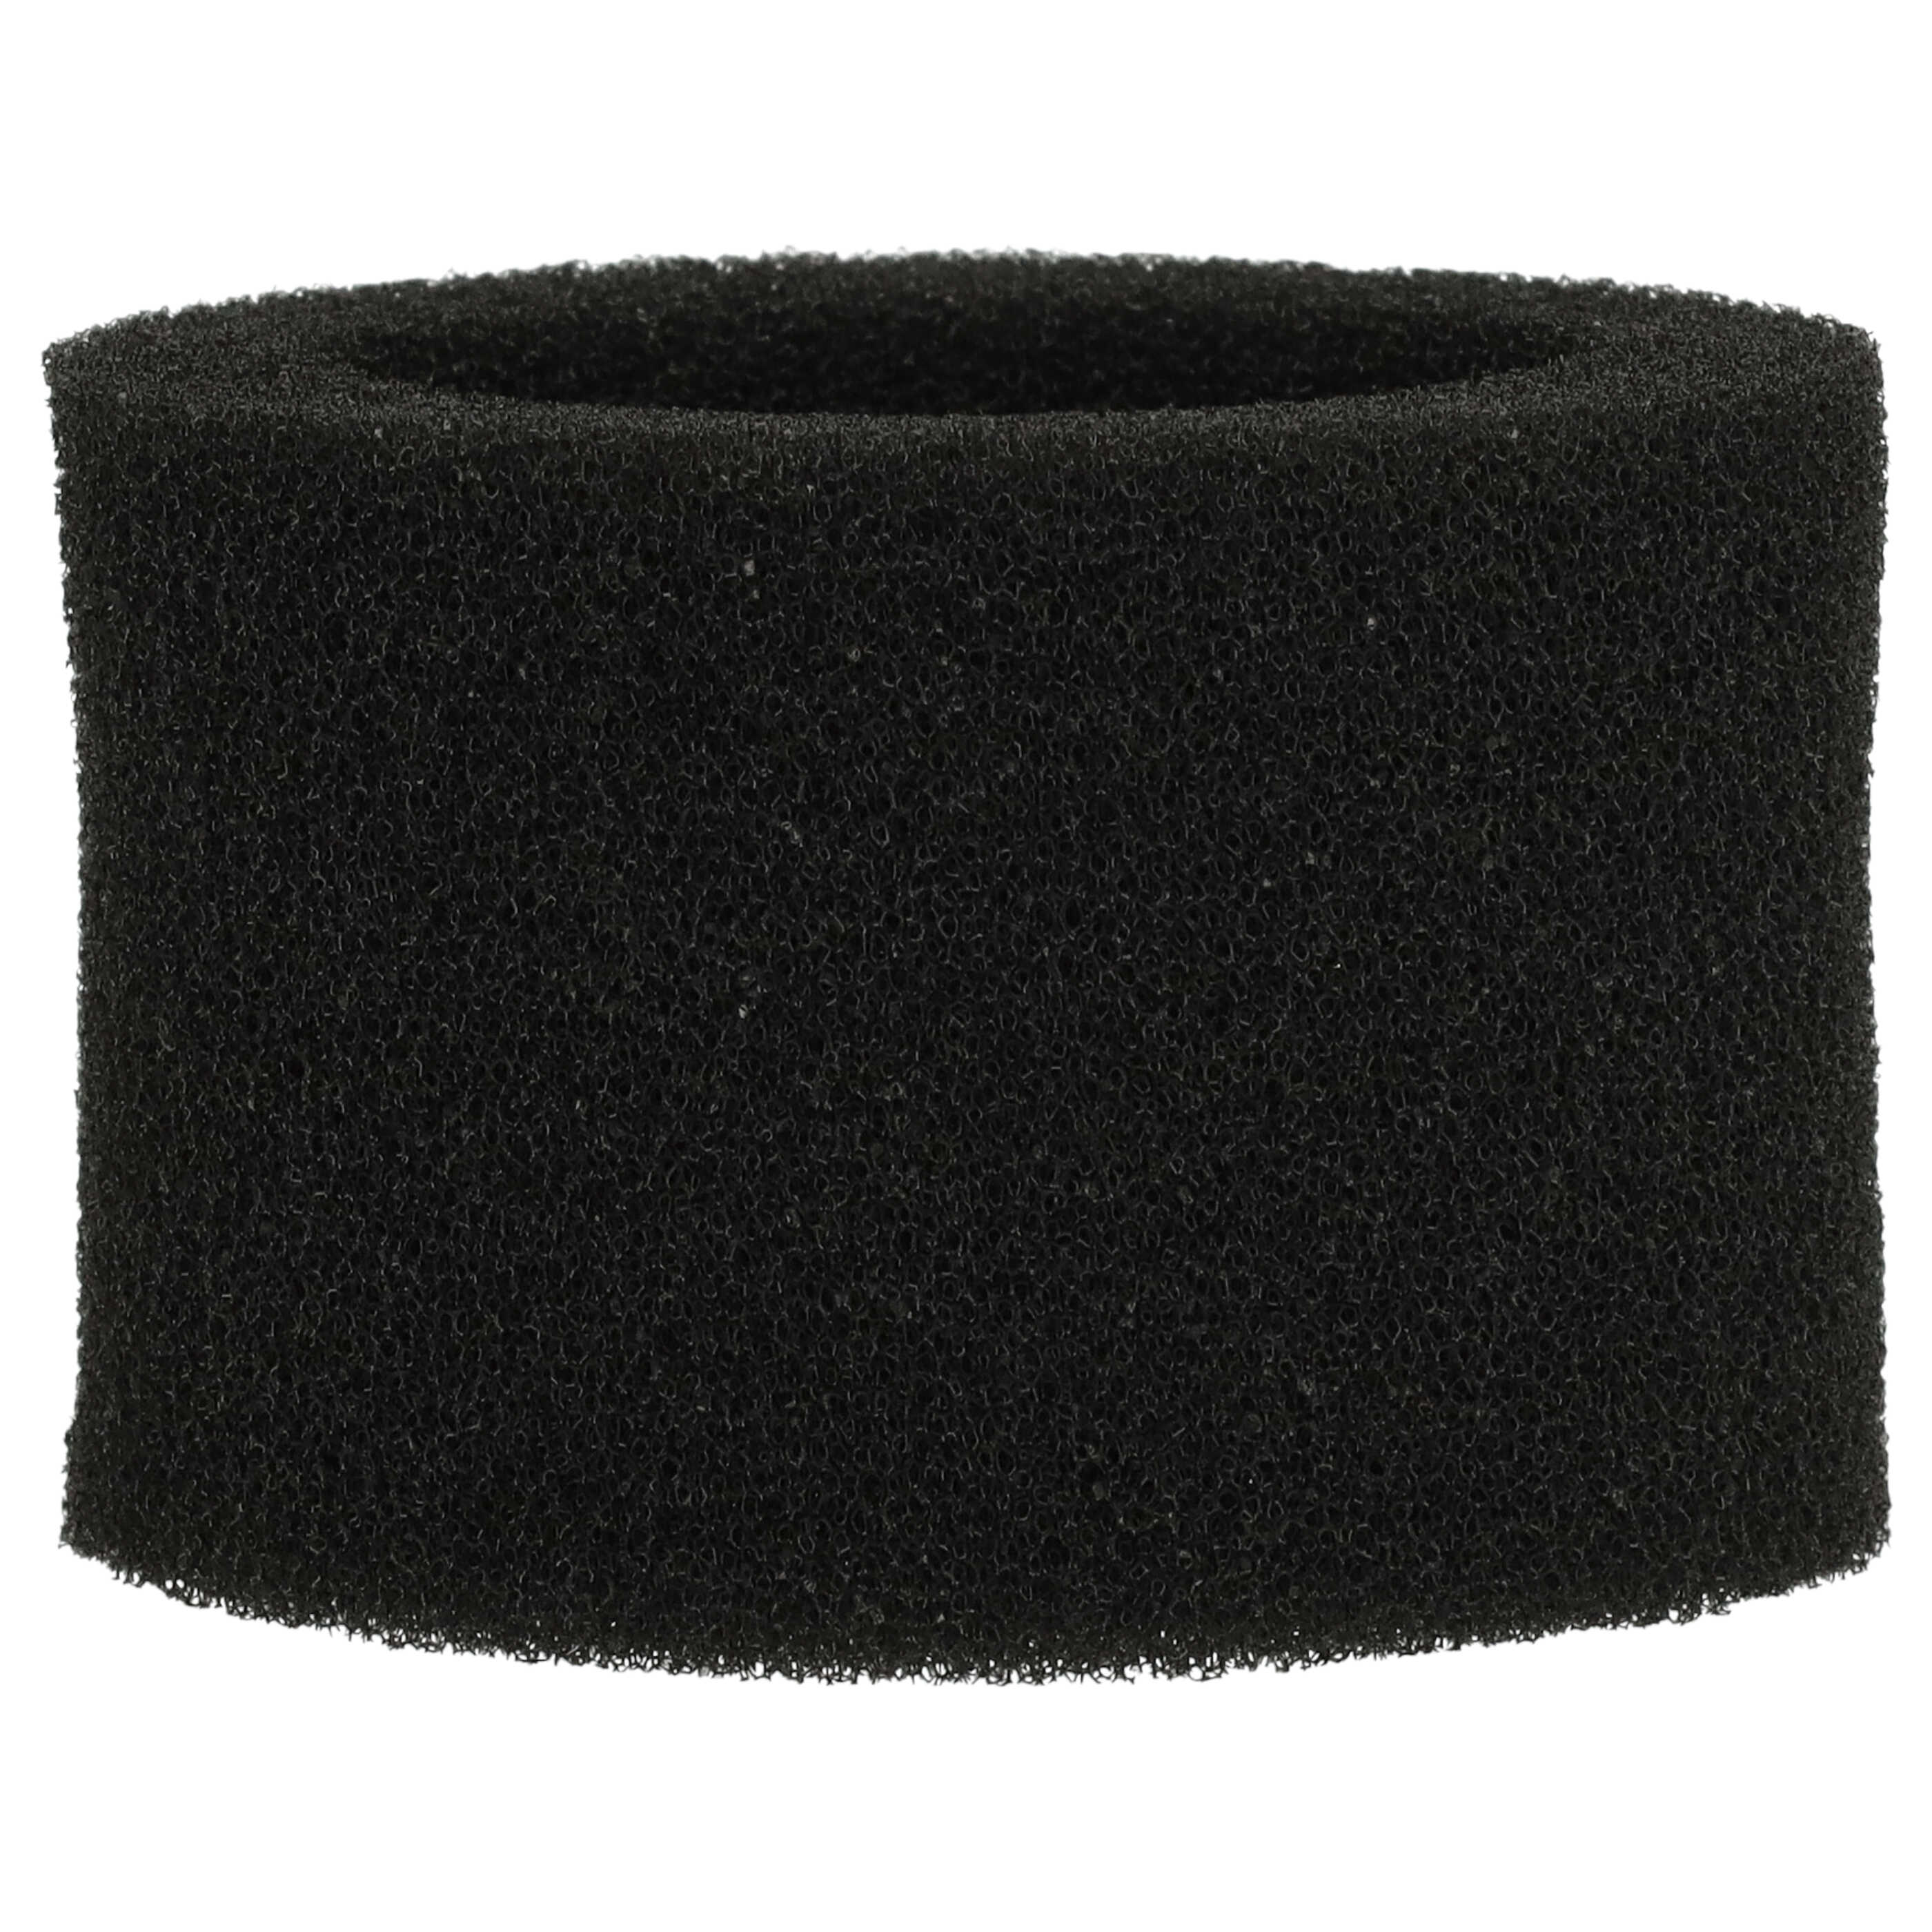 1x foam ring replaces Mio Star/Severin 5326-048, 9000030649, 5326048 for Mio Star Vacuum Cleaner